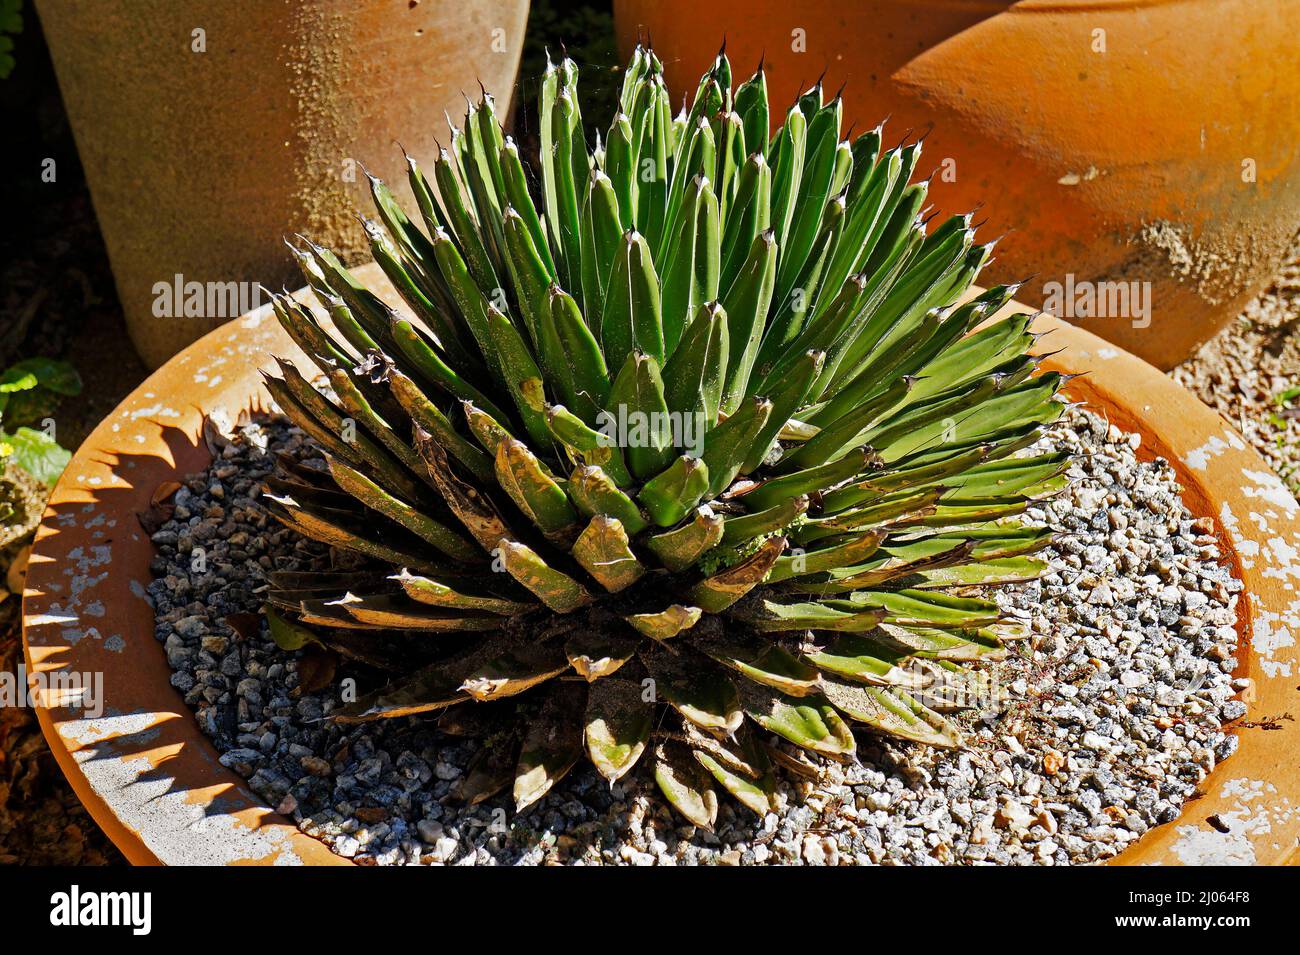 Queen Victoria agave or royal agave (Agave victoriae-reginae) on garden Stock Photo